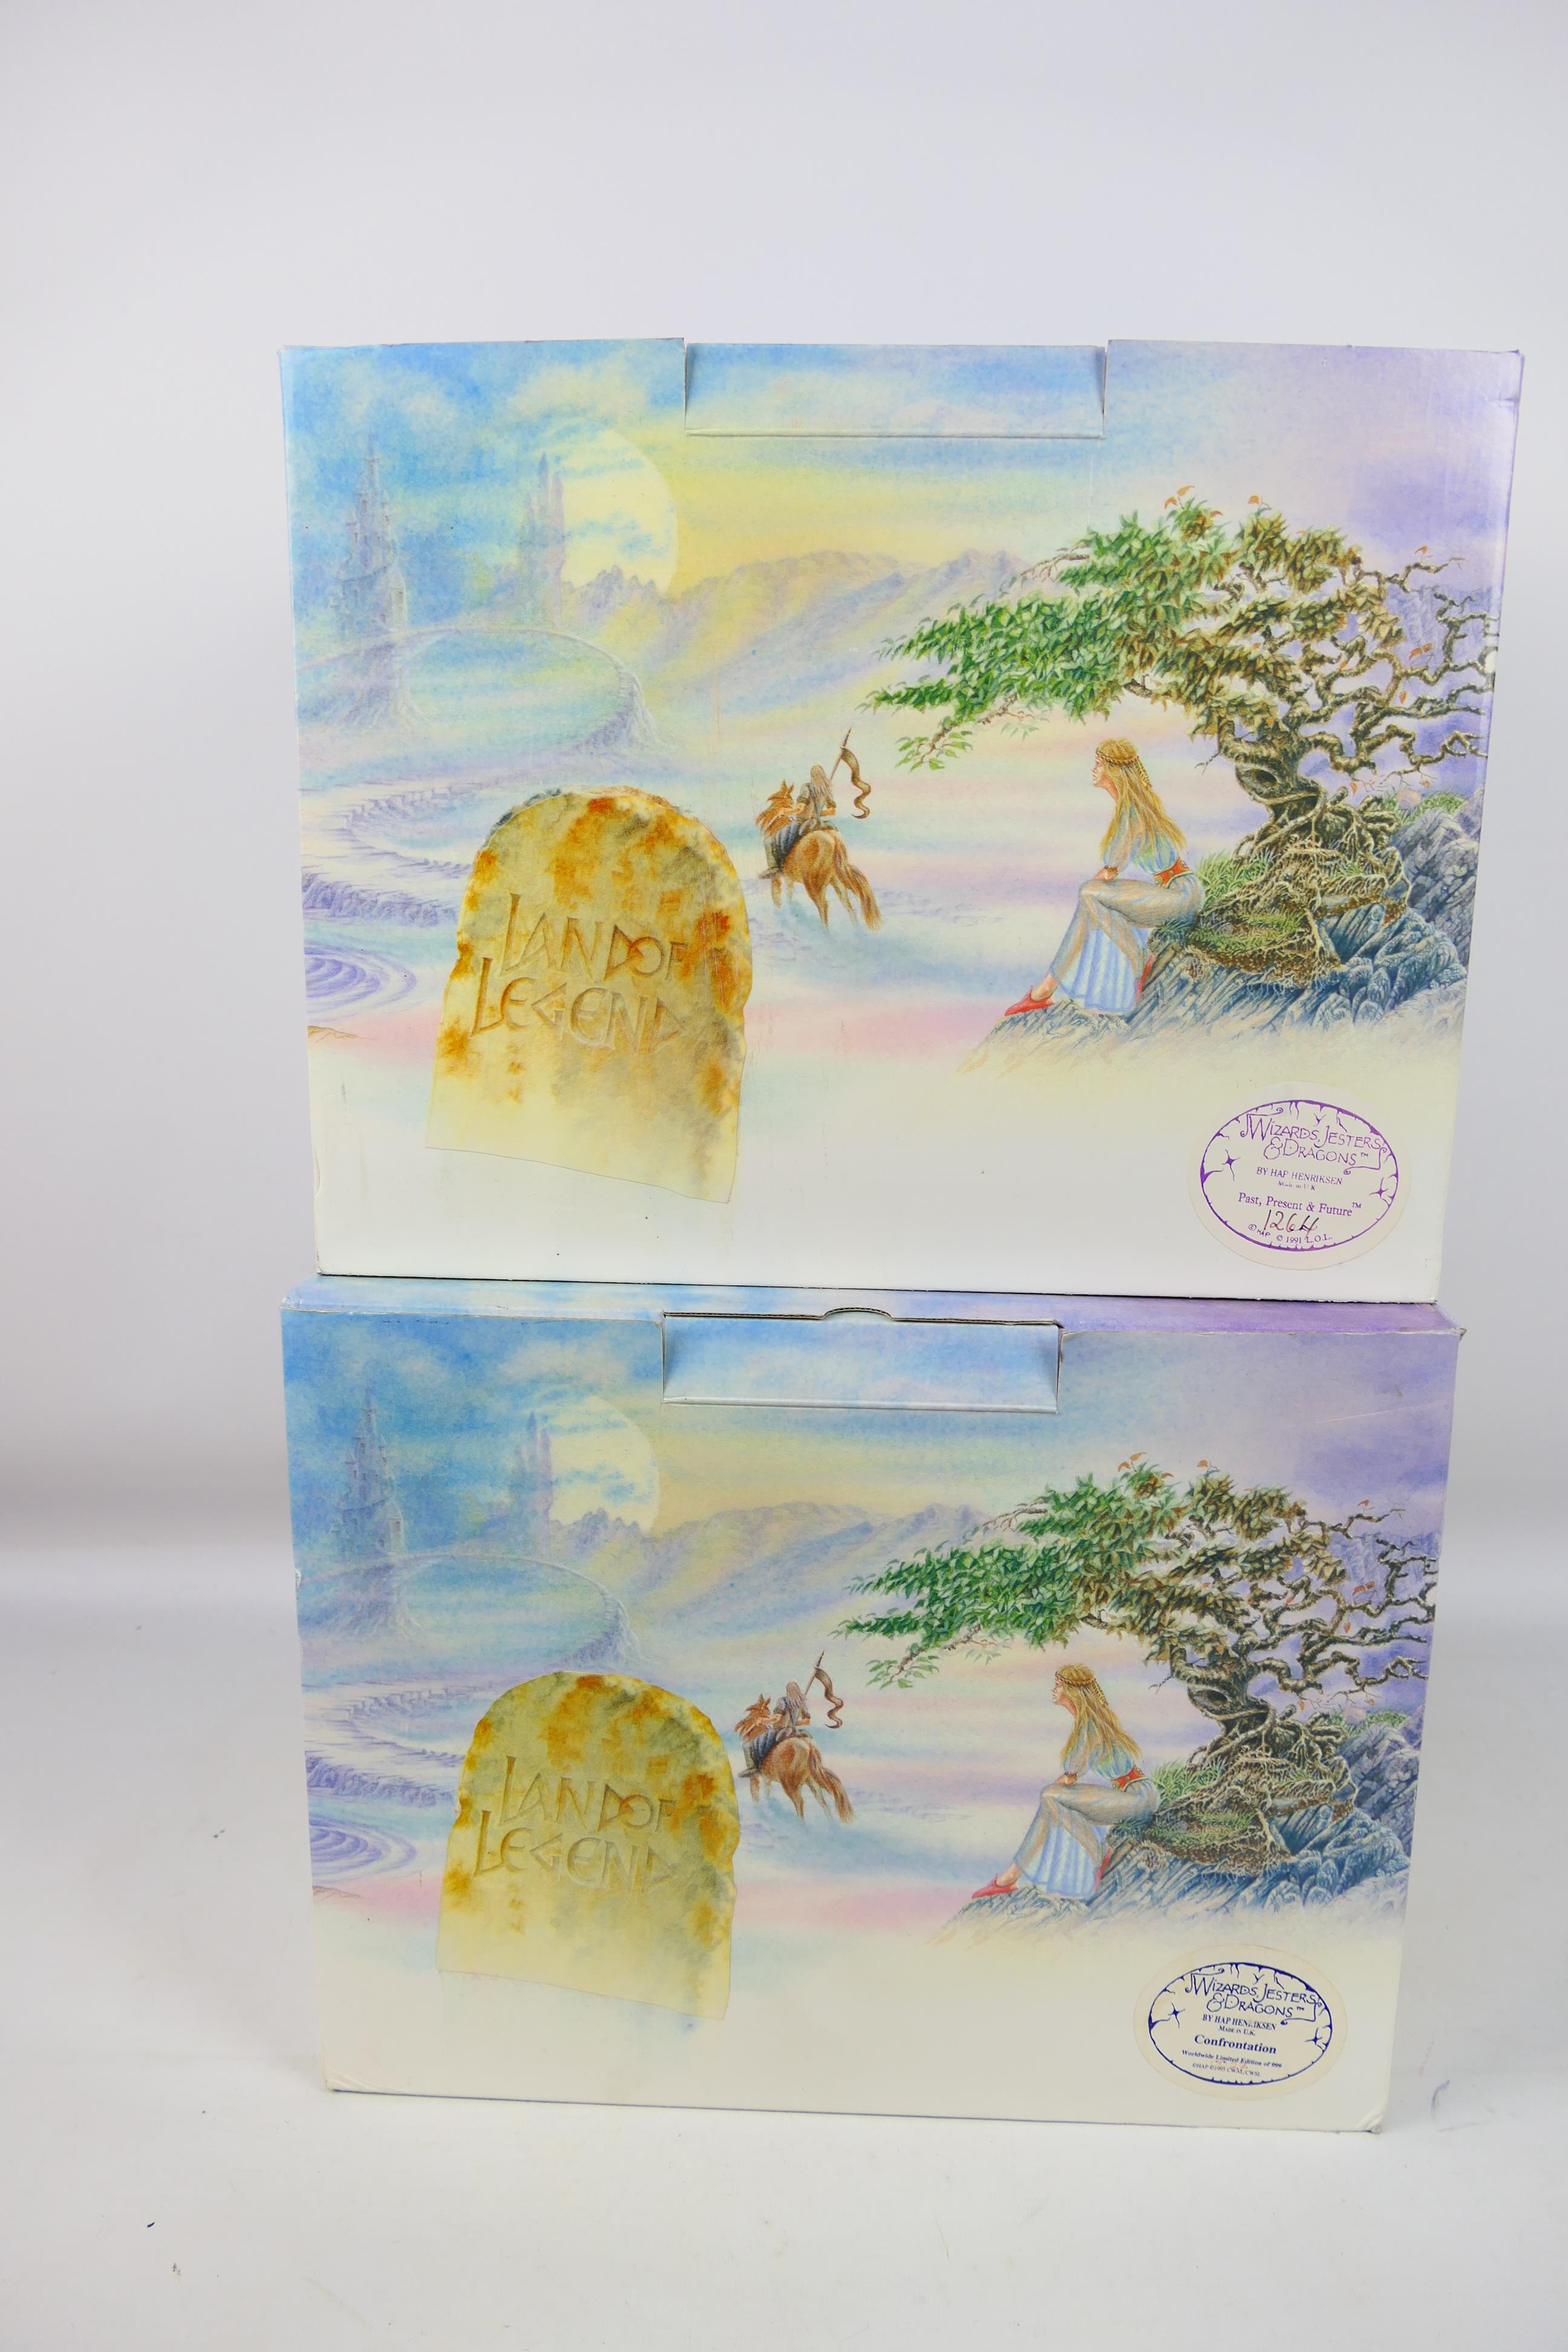 Two boxed limited edition Lilliput Lane Land Of Legend fantasy figures / groups designed by Hap - Image 8 of 8